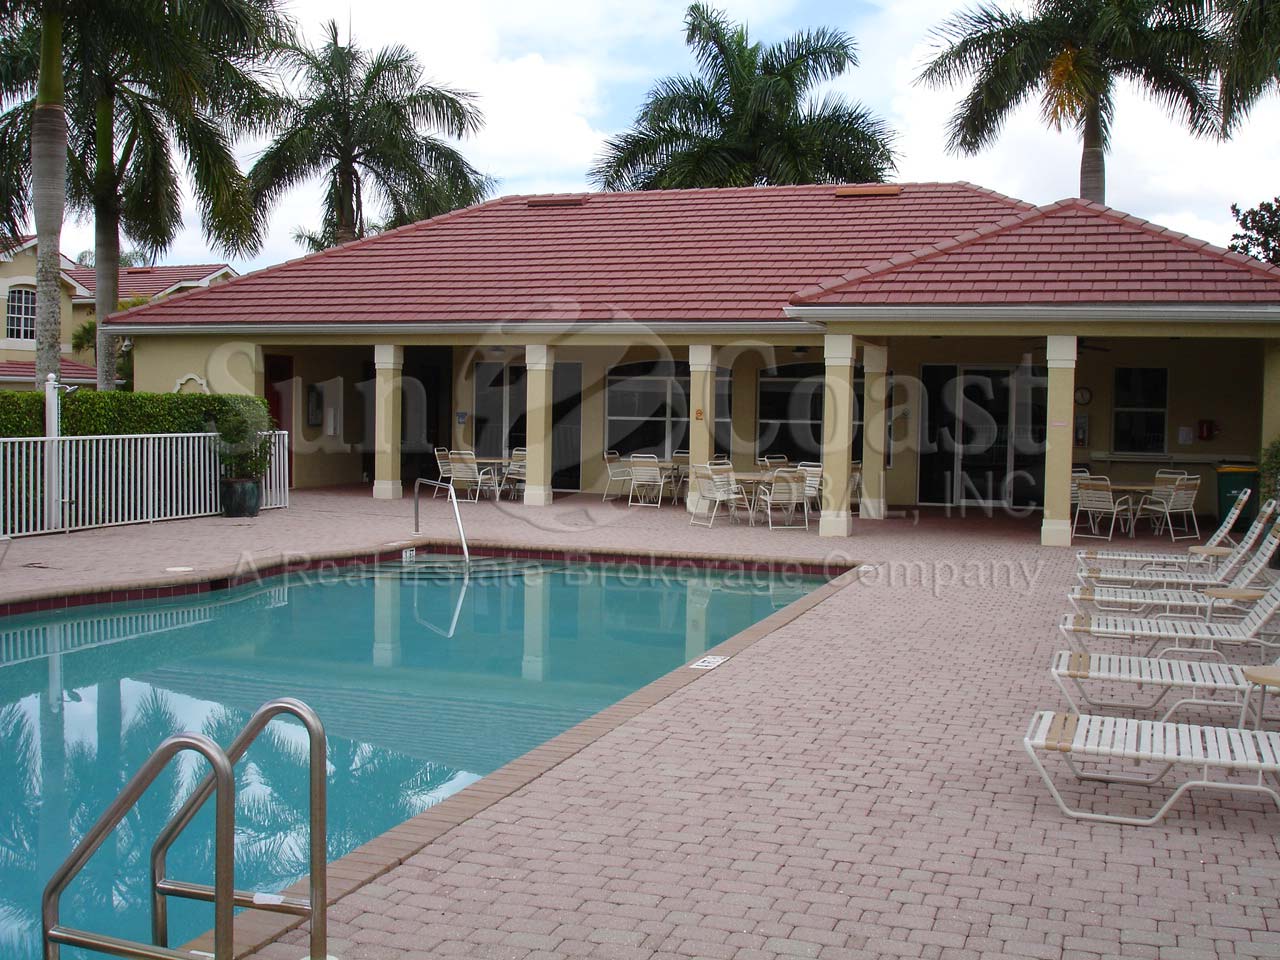 Pinnacle pool and clubhouse